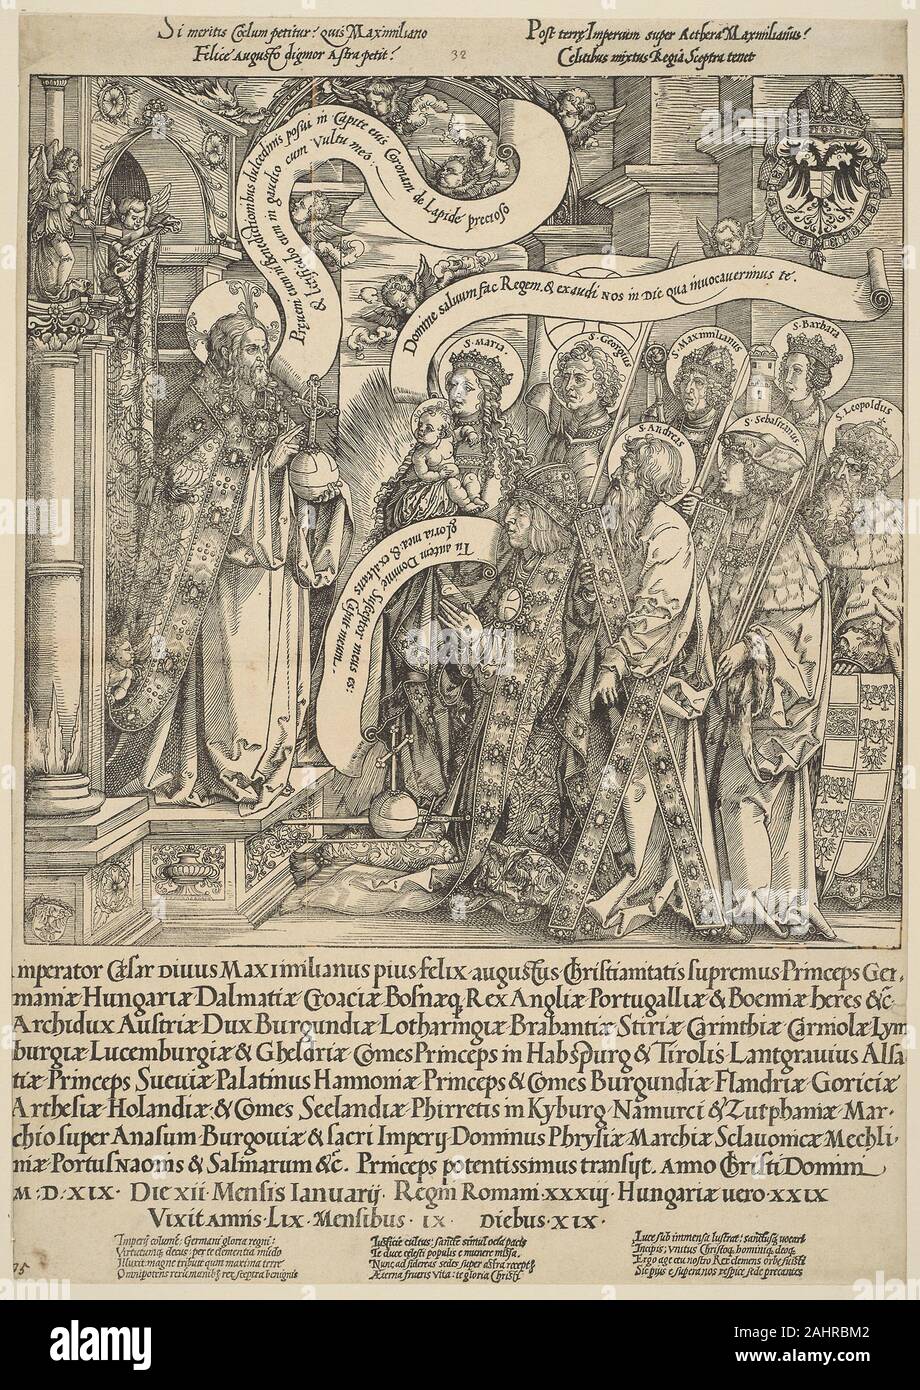 Hans Springinklee. The Emperor Maximilian Presented to Christ by His Patron Saints. 1519. Germany. Woodcut in black on cream laid paper with xylographic text This memorial woodcut celebrates the Holy Roman Emperor Maximilian’s passage into eternal life. He appears kneeling in front of Christ, hoping his resplendent throng of Habsburg family saints will help him enter heaven. The Virgin and Child are present, as are Saints Andrew, Barbara, George, Leopold, Maximilian, and Sebastian, each bearing their attributes. The Latin text below the woodcut lists the emperor’s many titles and territories a Stock Photo